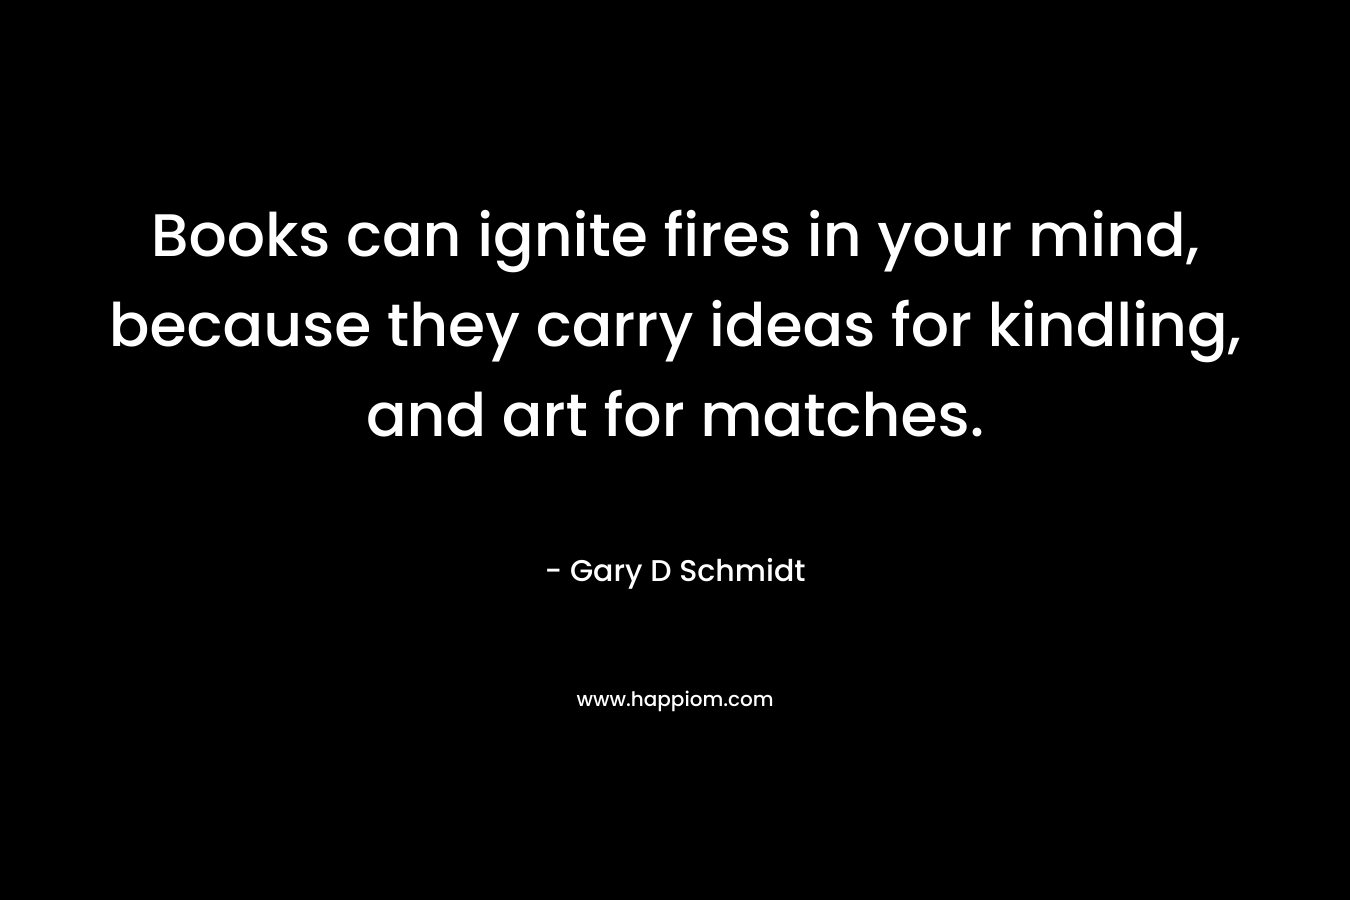 Books can ignite fires in your mind, because they carry ideas for kindling, and art for matches. – Gary D Schmidt